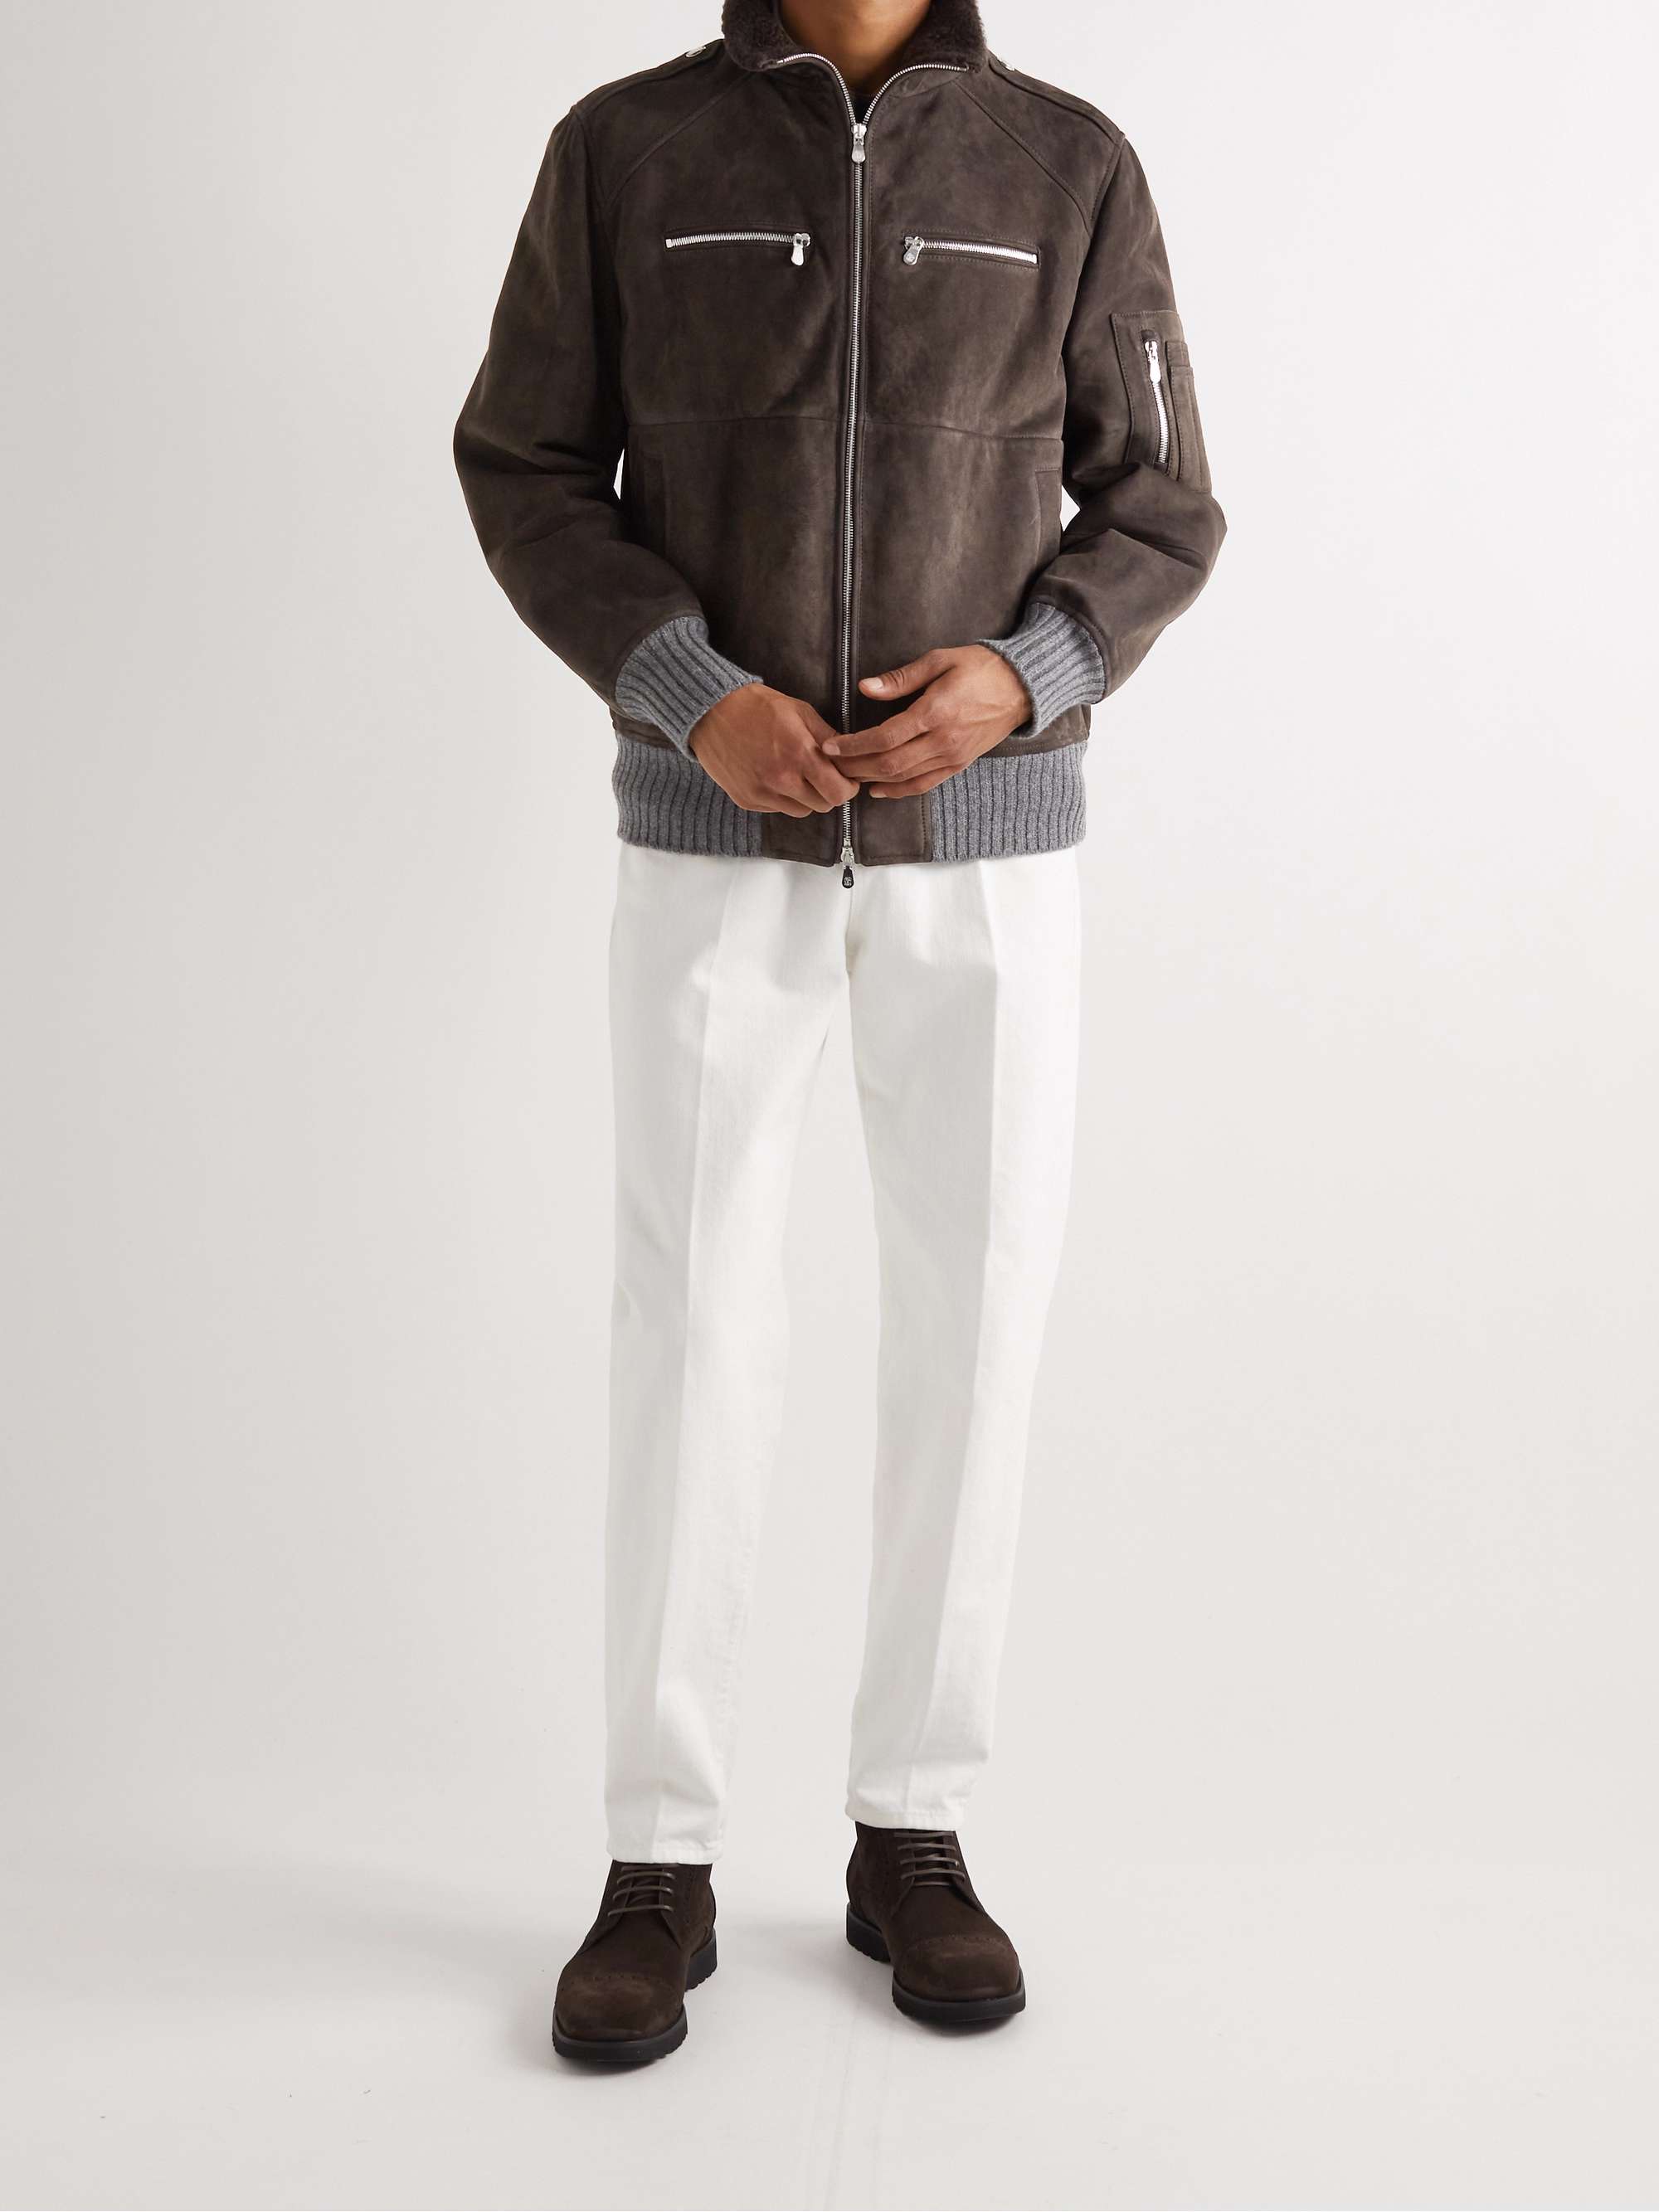 BRUNELLO CUCINELLI Shearling-Lined Cashmere-Trimmed Suede Bomber Jacket